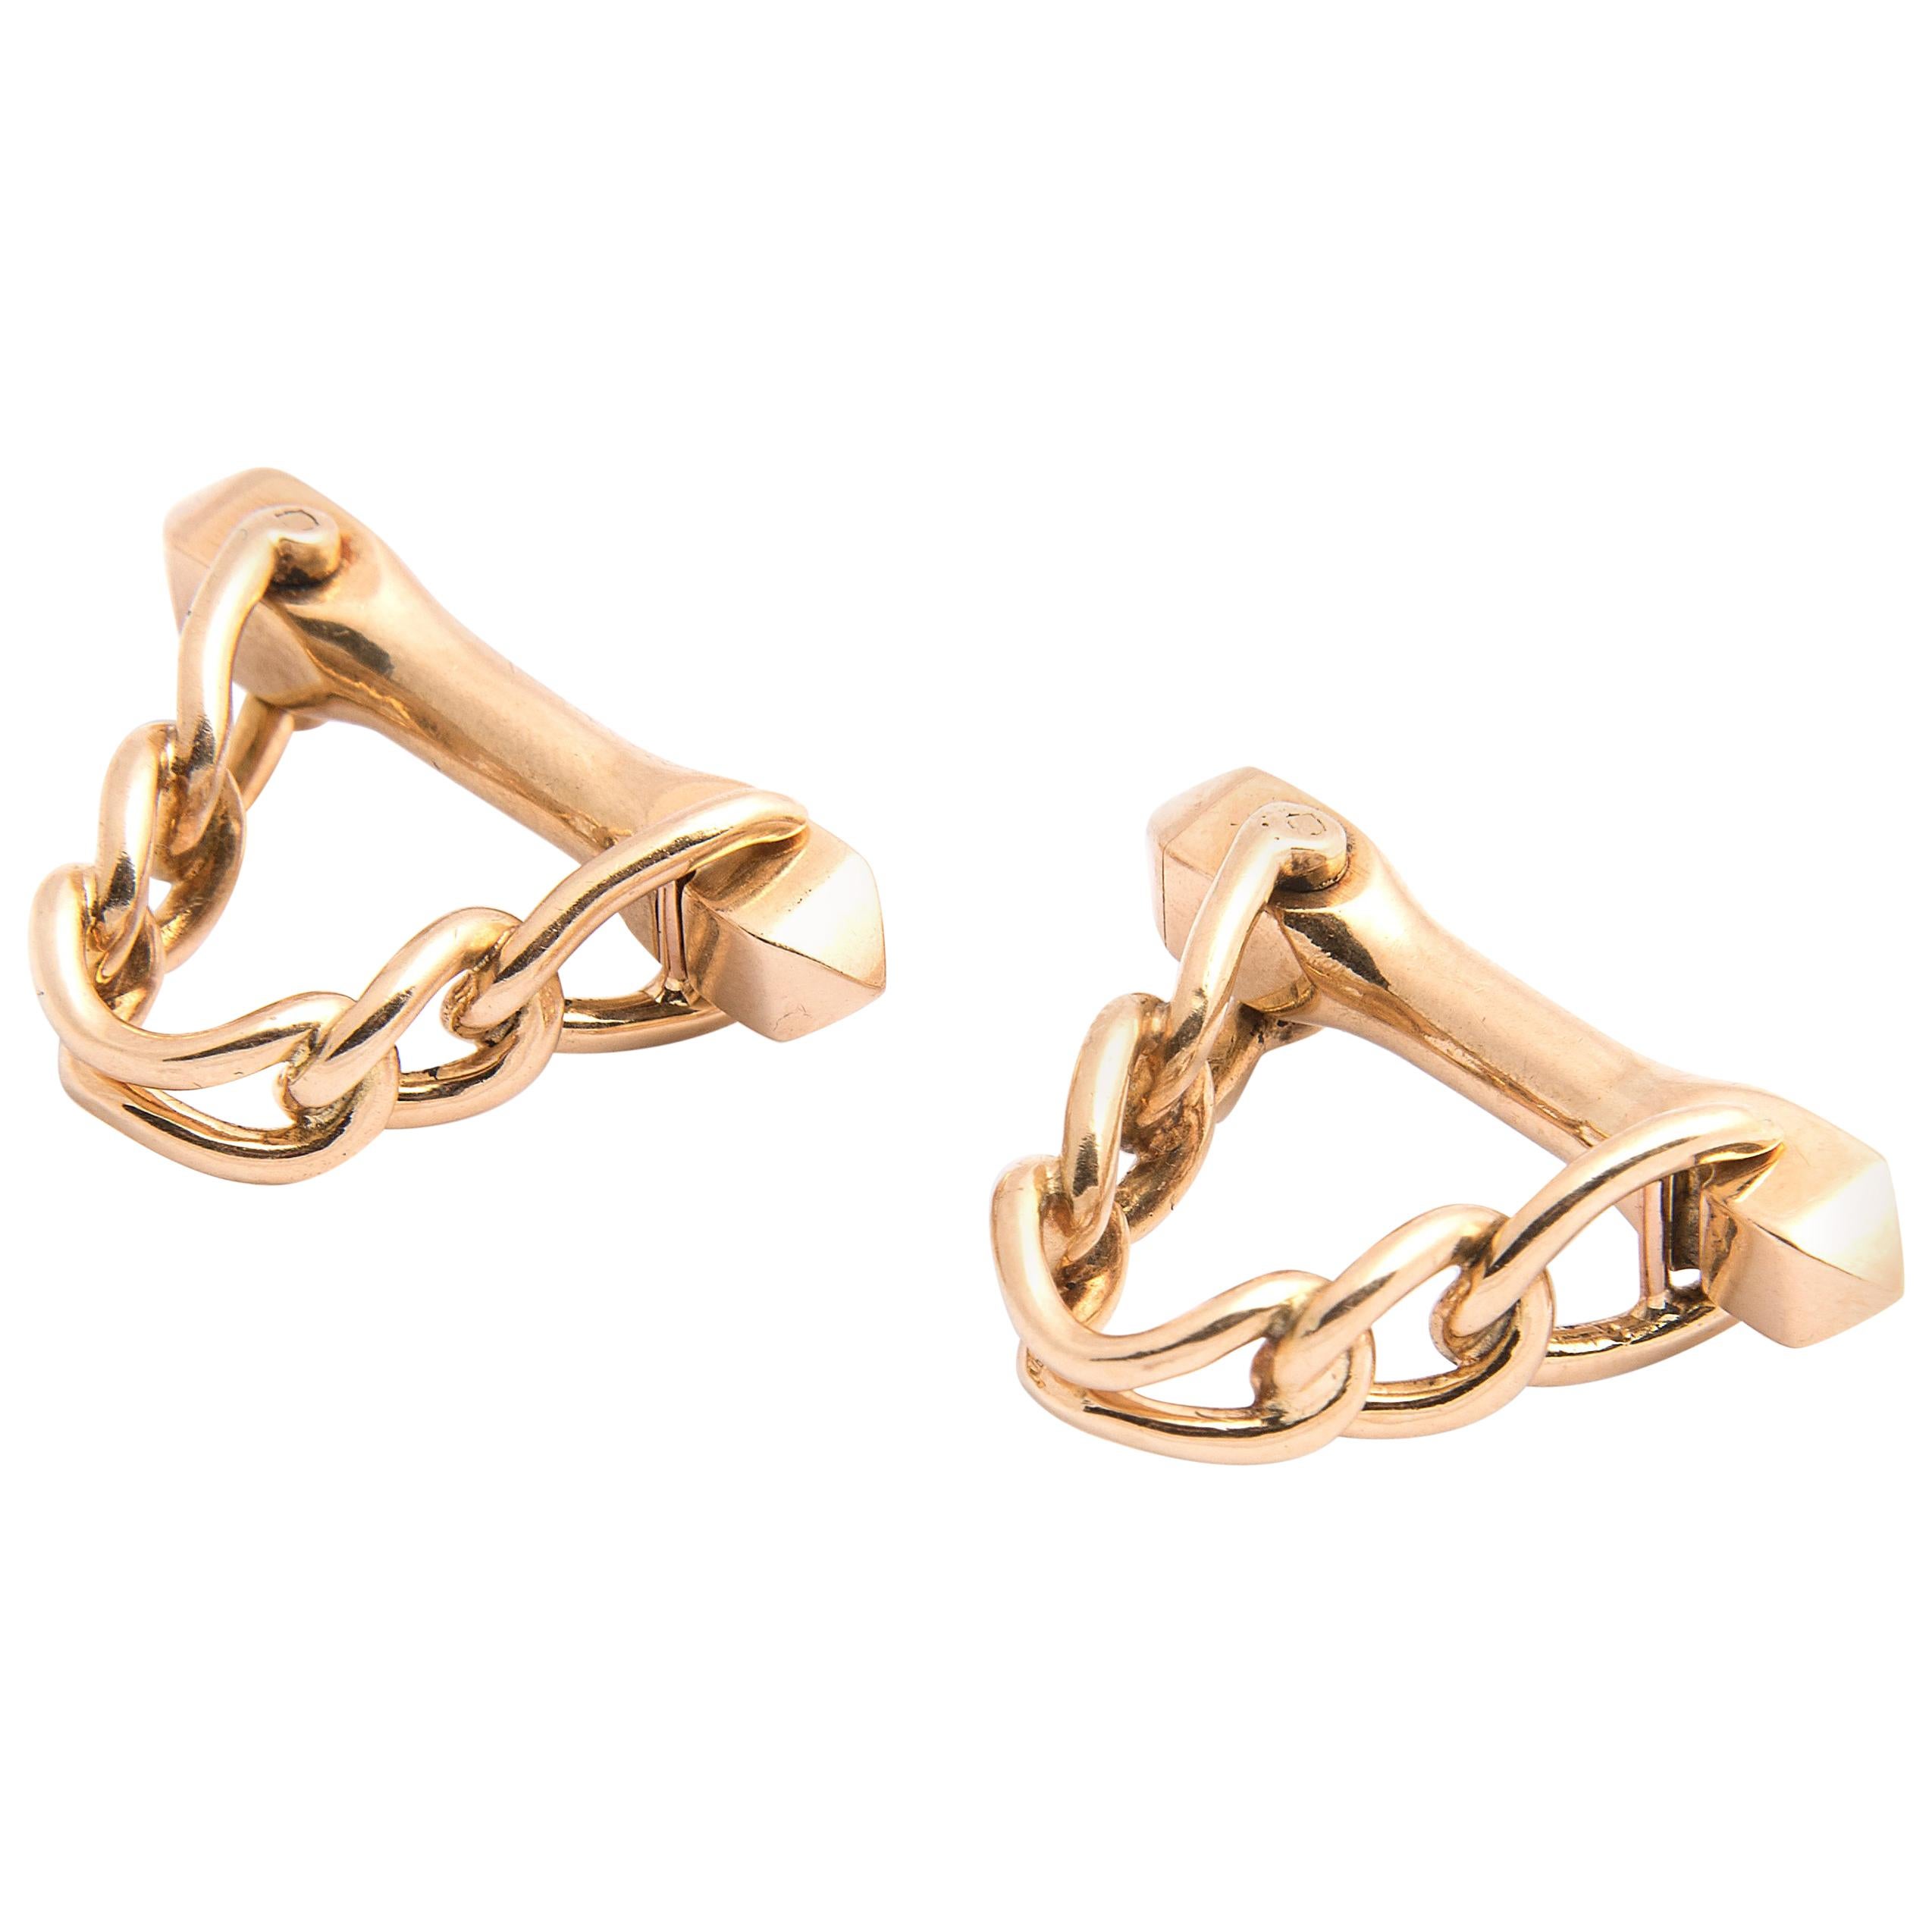 Pair of 18k Yellow Gold Cufflinks For Sale